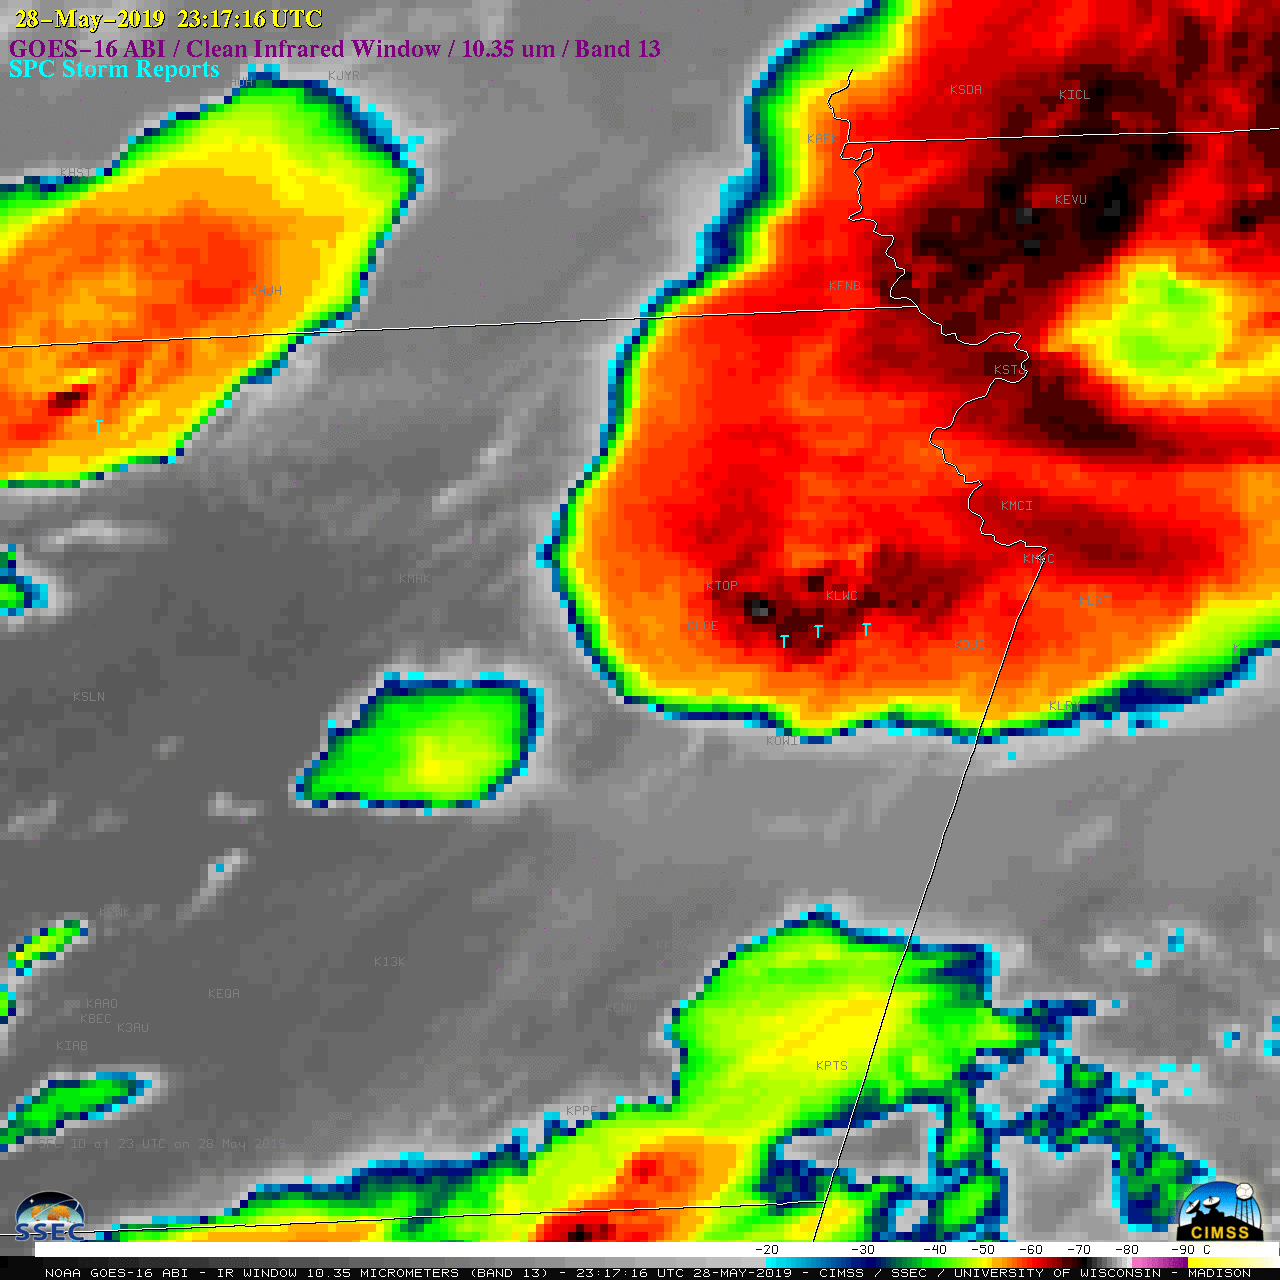 GOES-16 “Clean” Infrared Window (10.35 µm) images, with SPC Storm Reports plotted in cyan [click to play MP4 animation]